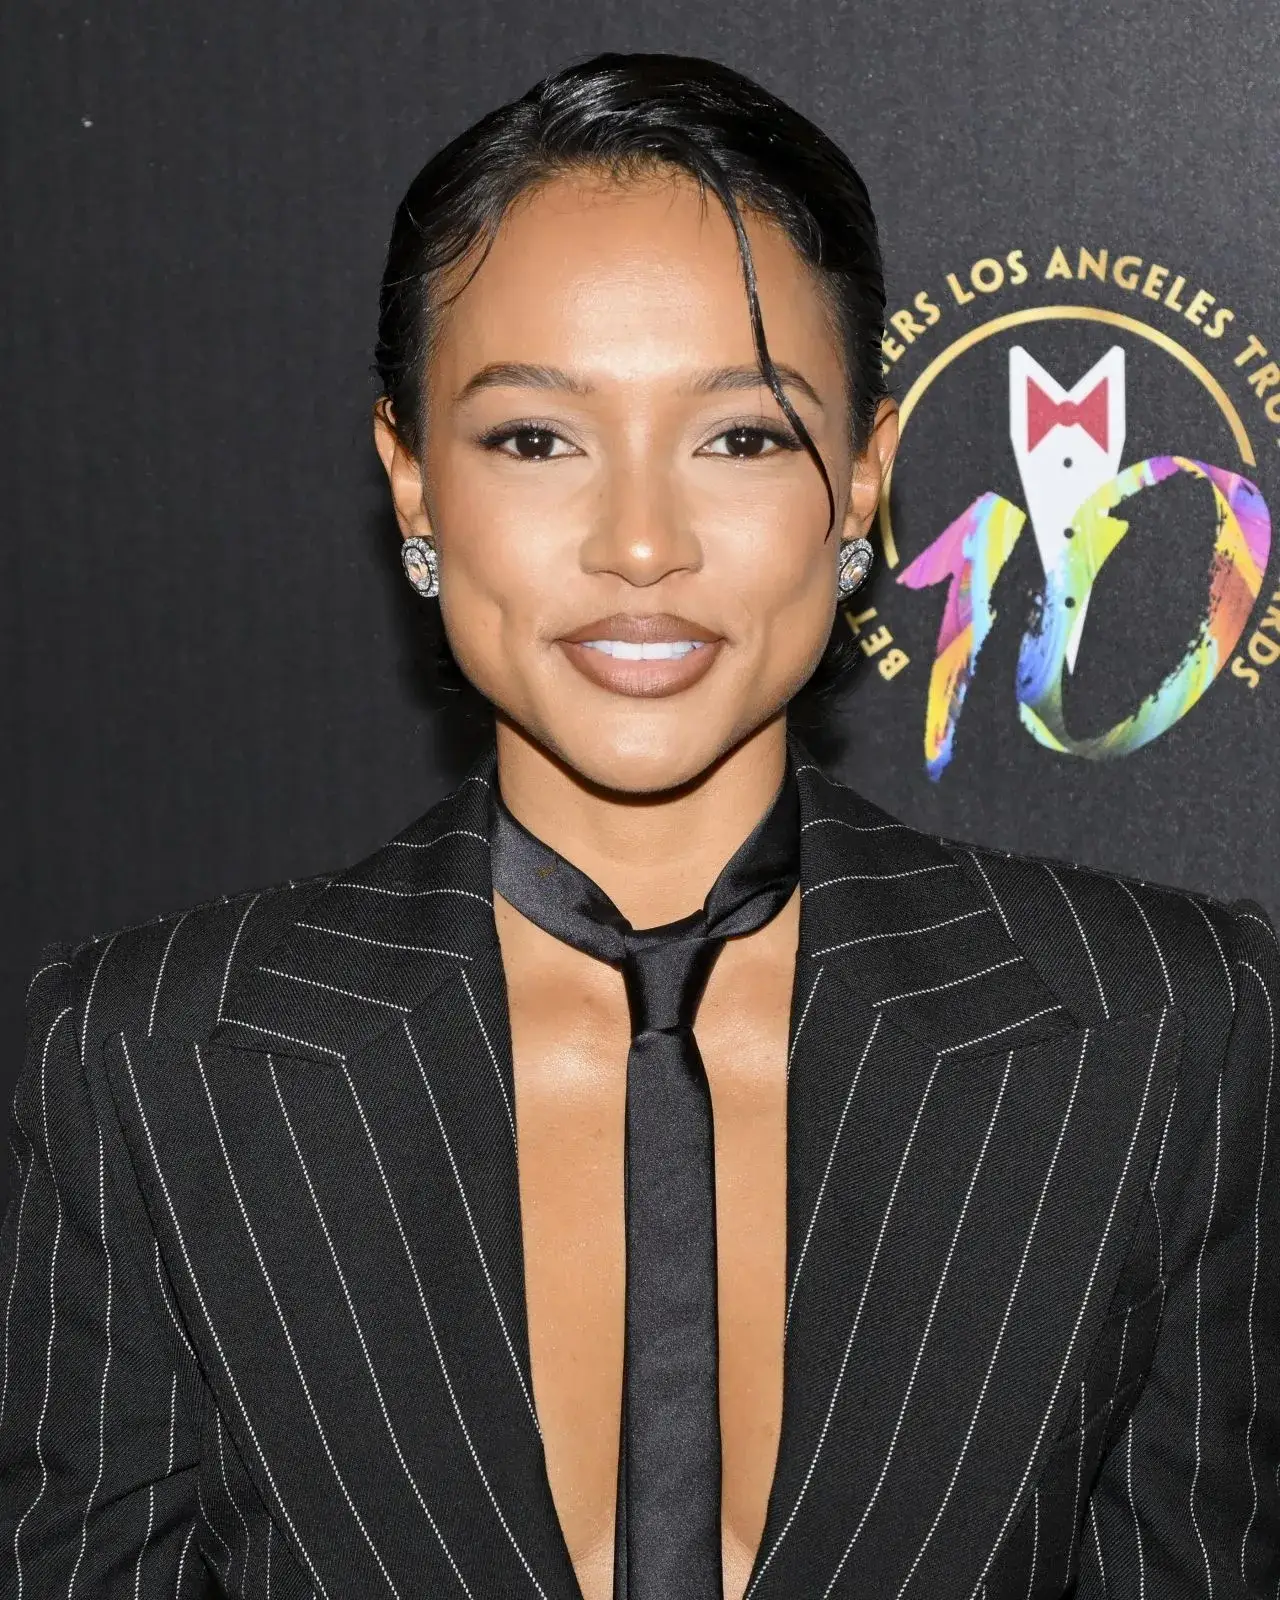 KARRUECHE TRAN AT TRUTH AWARDS AT THE BEVERLY HILTON IN BEVERLY HILLS 4